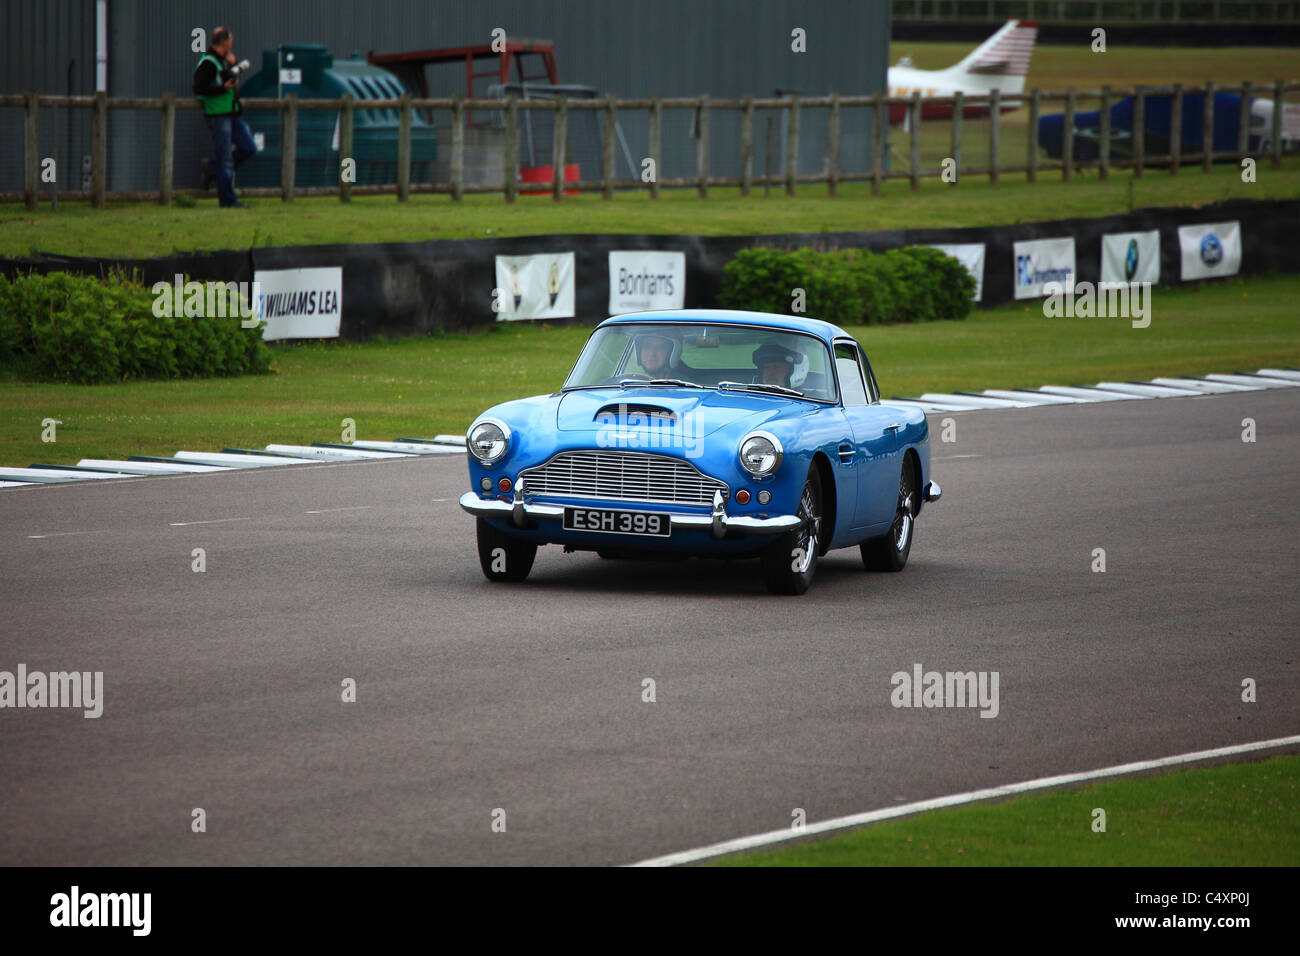 Goodwood Curcuit, the historic motor racing venue near Chichester in West Sussex. Stock Photo